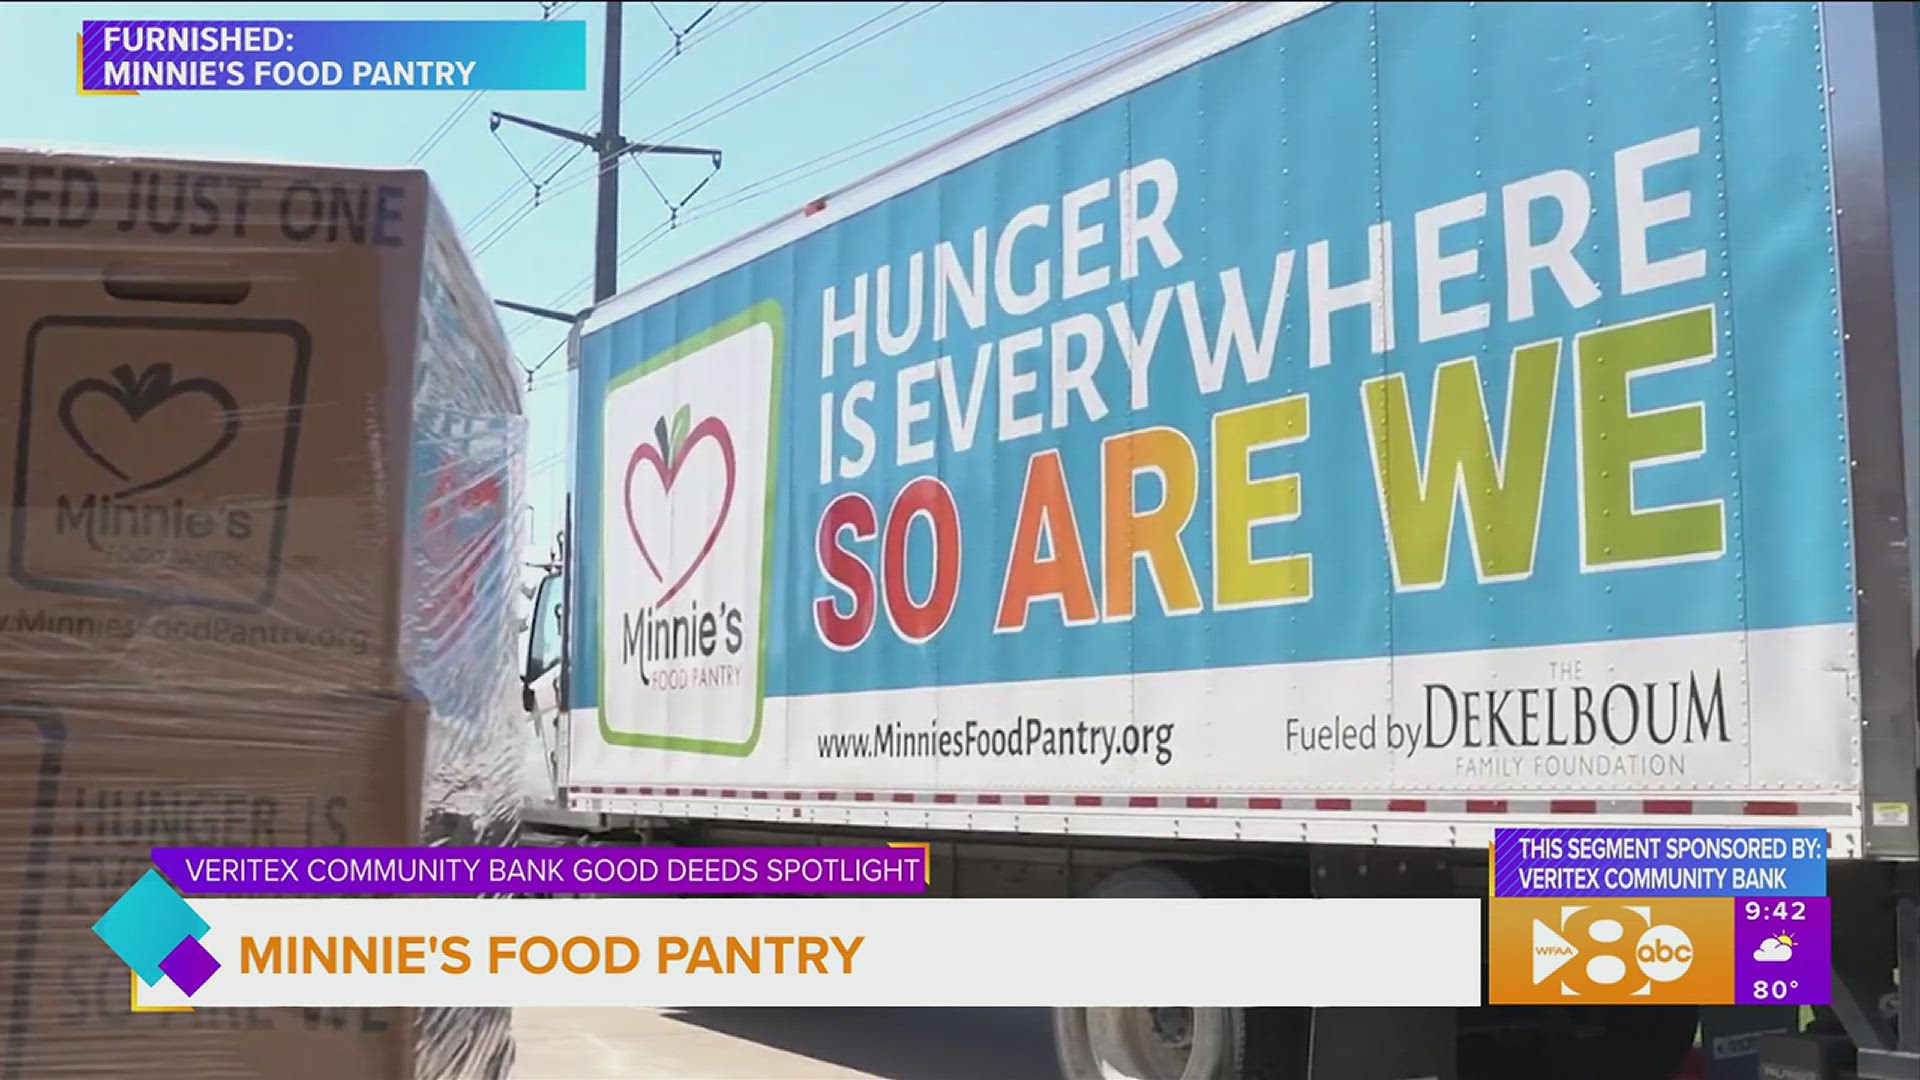 This segment is sponsored by Veritex Community Bank. Go to minniesfoodpantry.org or call 972.596.0253 for more information.